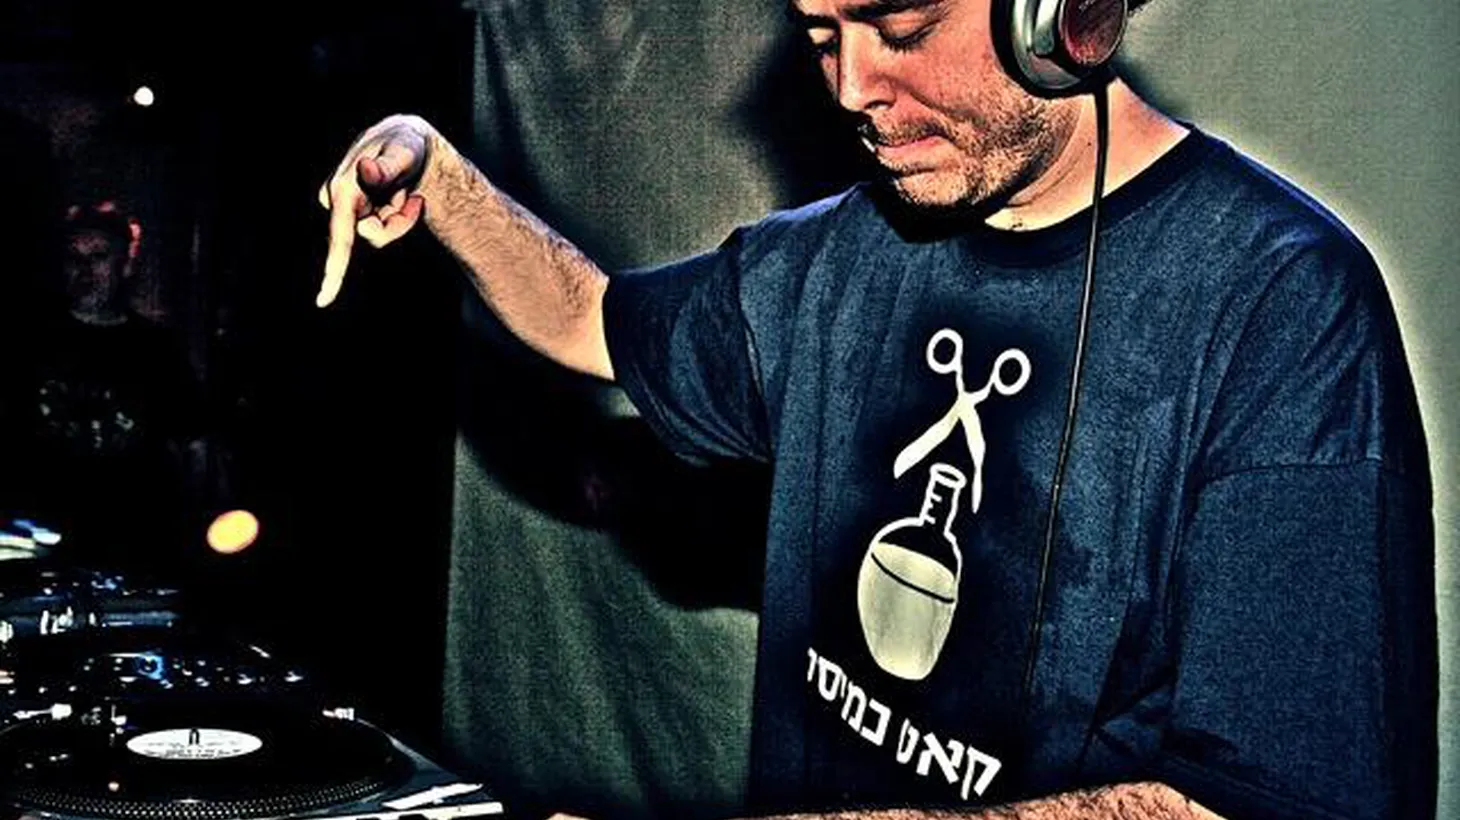 Master turntablist Cut Chemist provides an aural world tour as he mixes intricate and seductive sets...